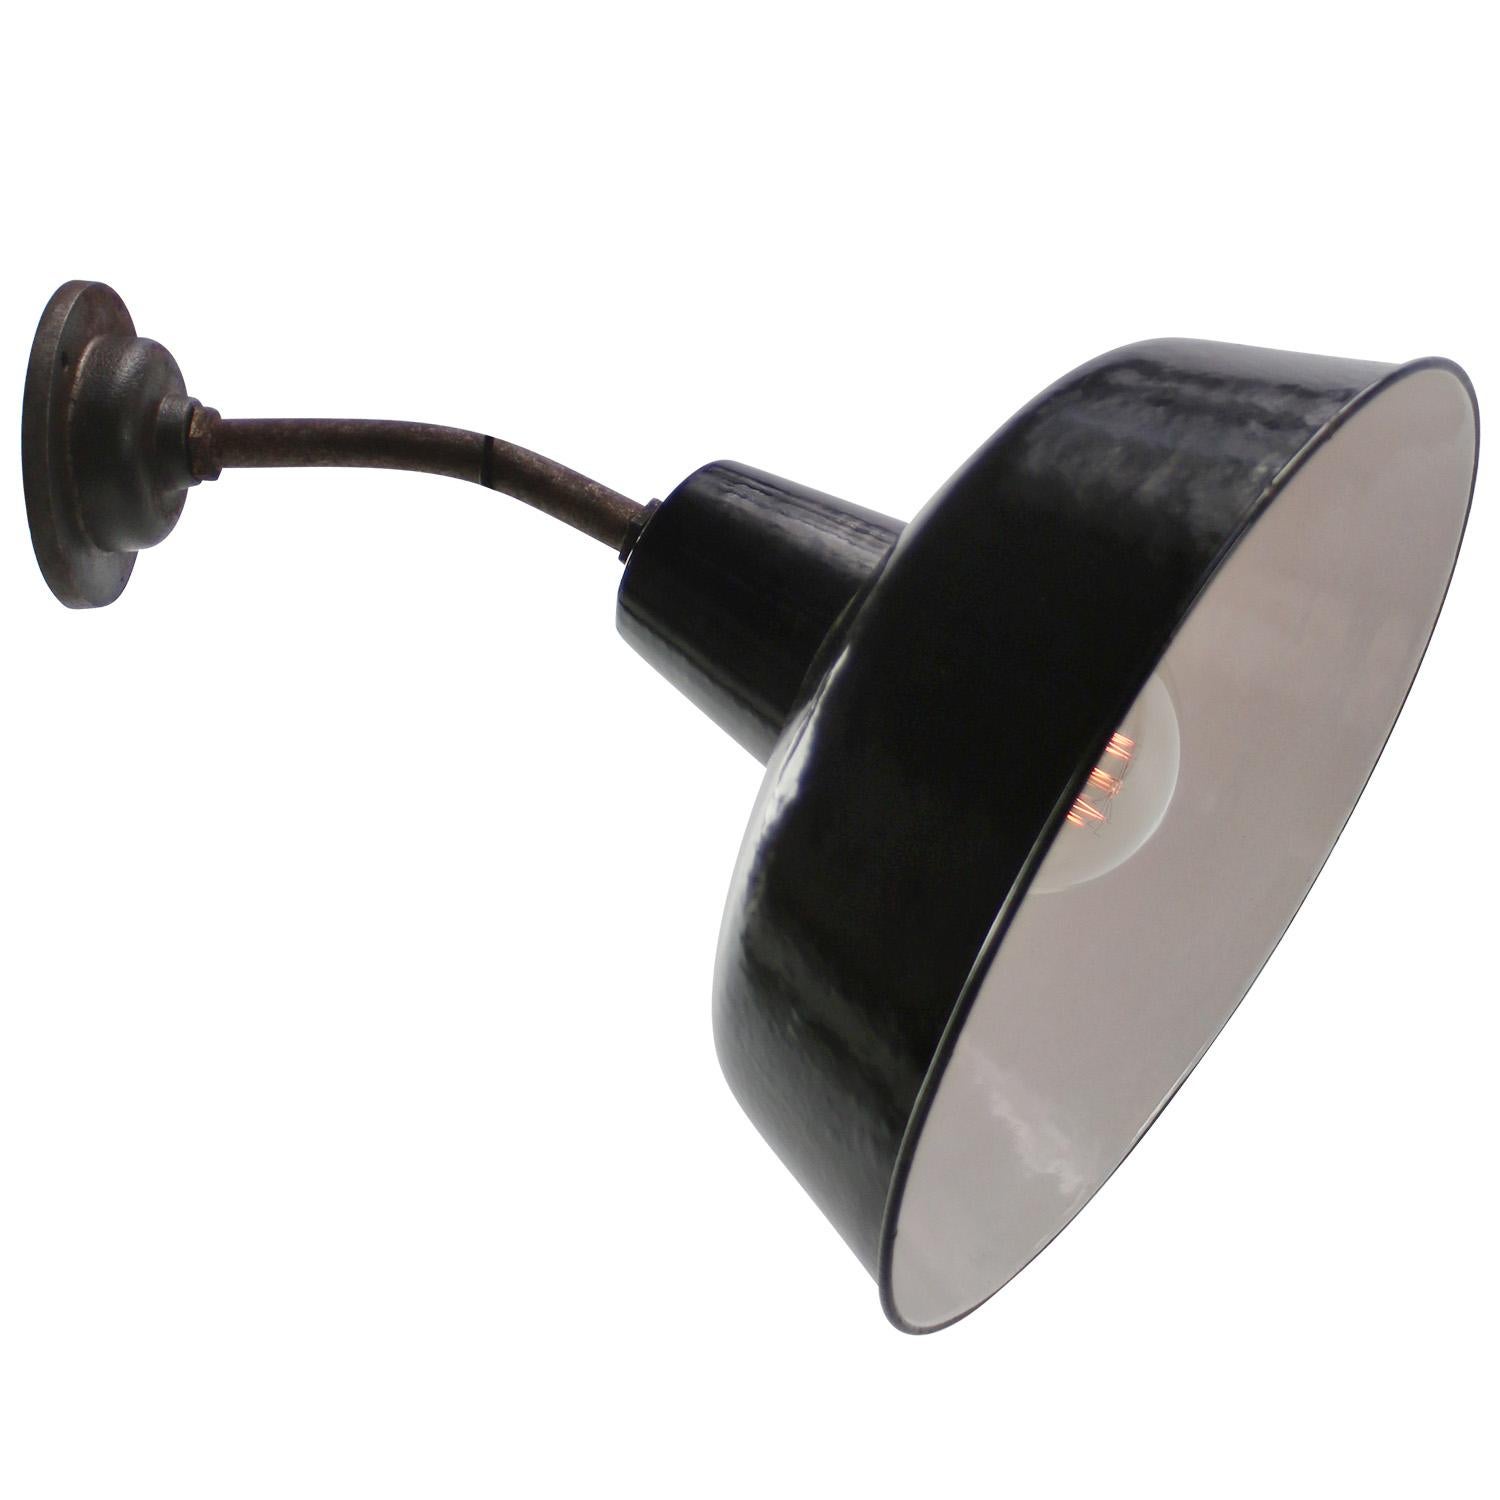 French factory wall light
black enamel, white interior

diameter cast iron wall piece: 10.5 cm, 2 holes to secure

Weight: 1.80 kg / 4 lb

Priced per individual item. All lamps have been made suitable by international standards for incandescent